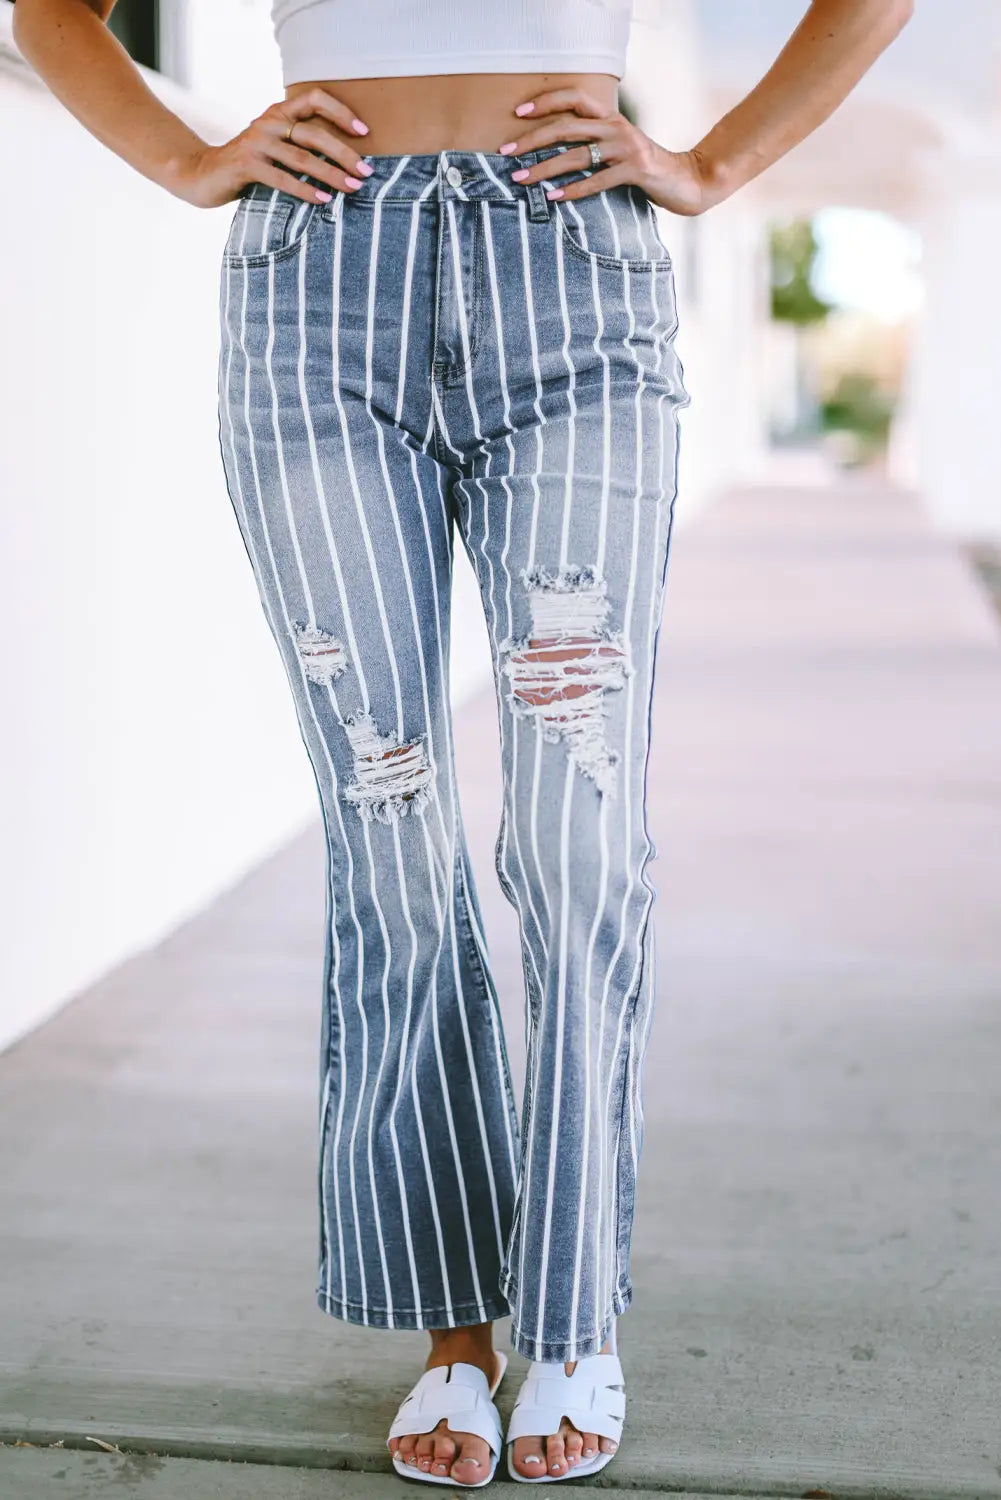 Sky blue vertical striped ripped flare jeans - 6 / 71.5% cotton + 25% polyester + 2% viscose + 1.5% elastane